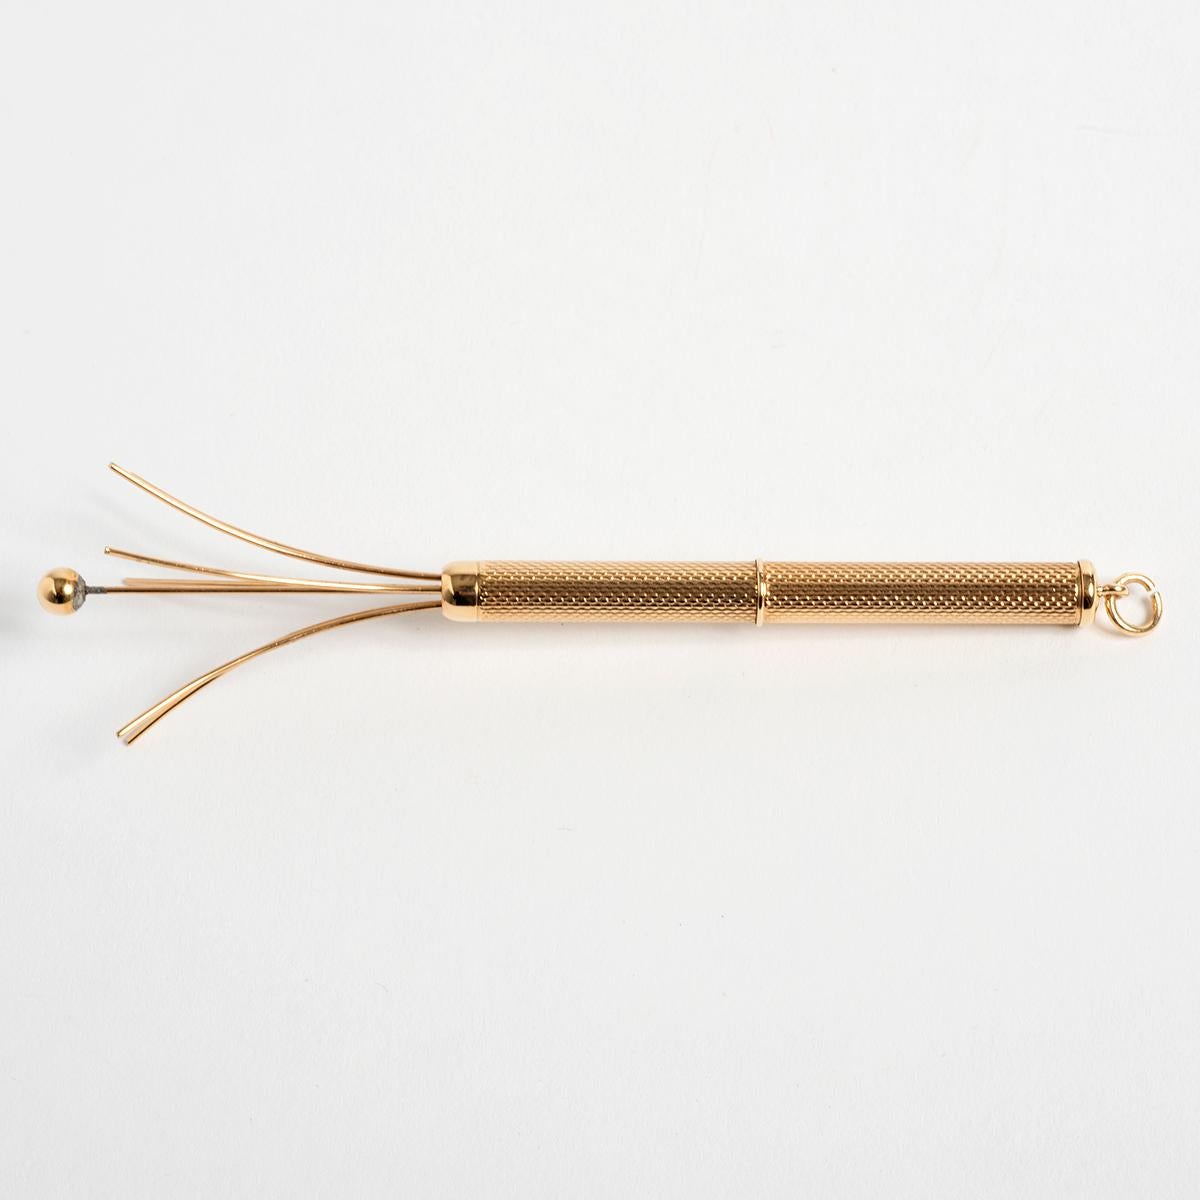 Popular in the roaring '20s and 1930s, a champagne swizzle stick was used to remove and reduce bubbles in a glass of champagne. This particular example also features a loop to the opposing end to fit to a chain or watch chain. The swizzle